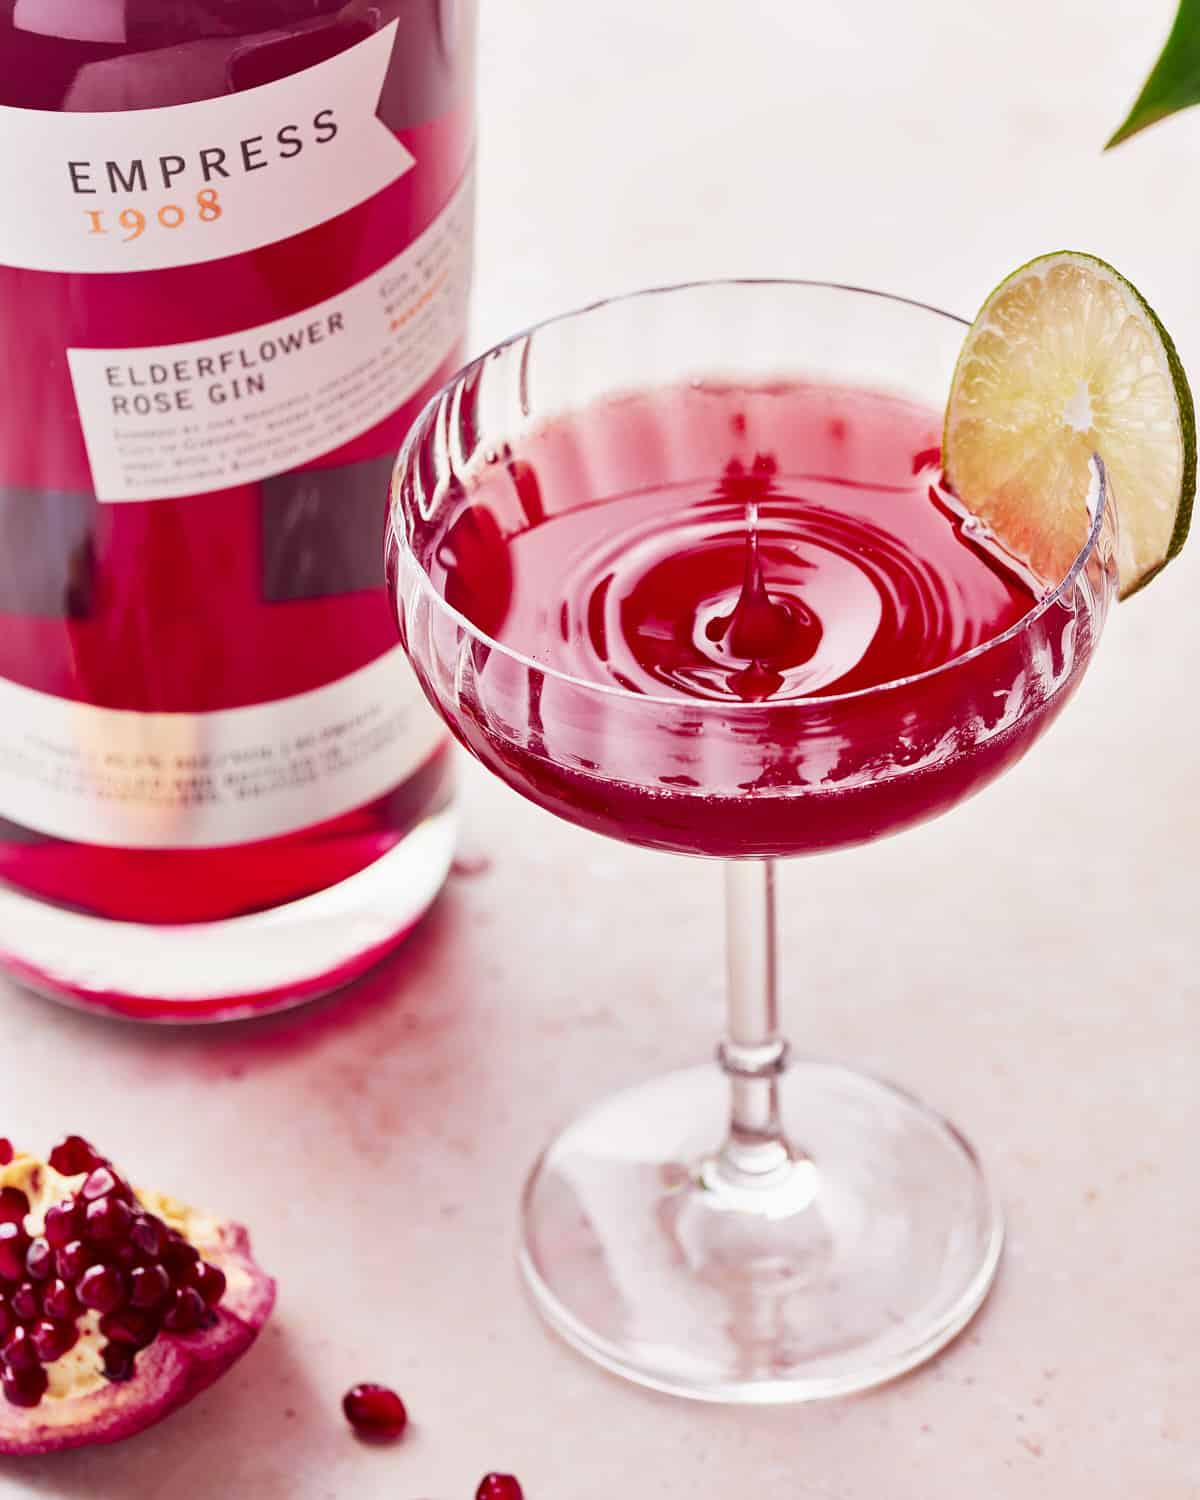 A splash of a glass of pomegranate gin gimlet garnished with lime wheel next to a bottle of Empress 1908 Elderflower Rose Gin.